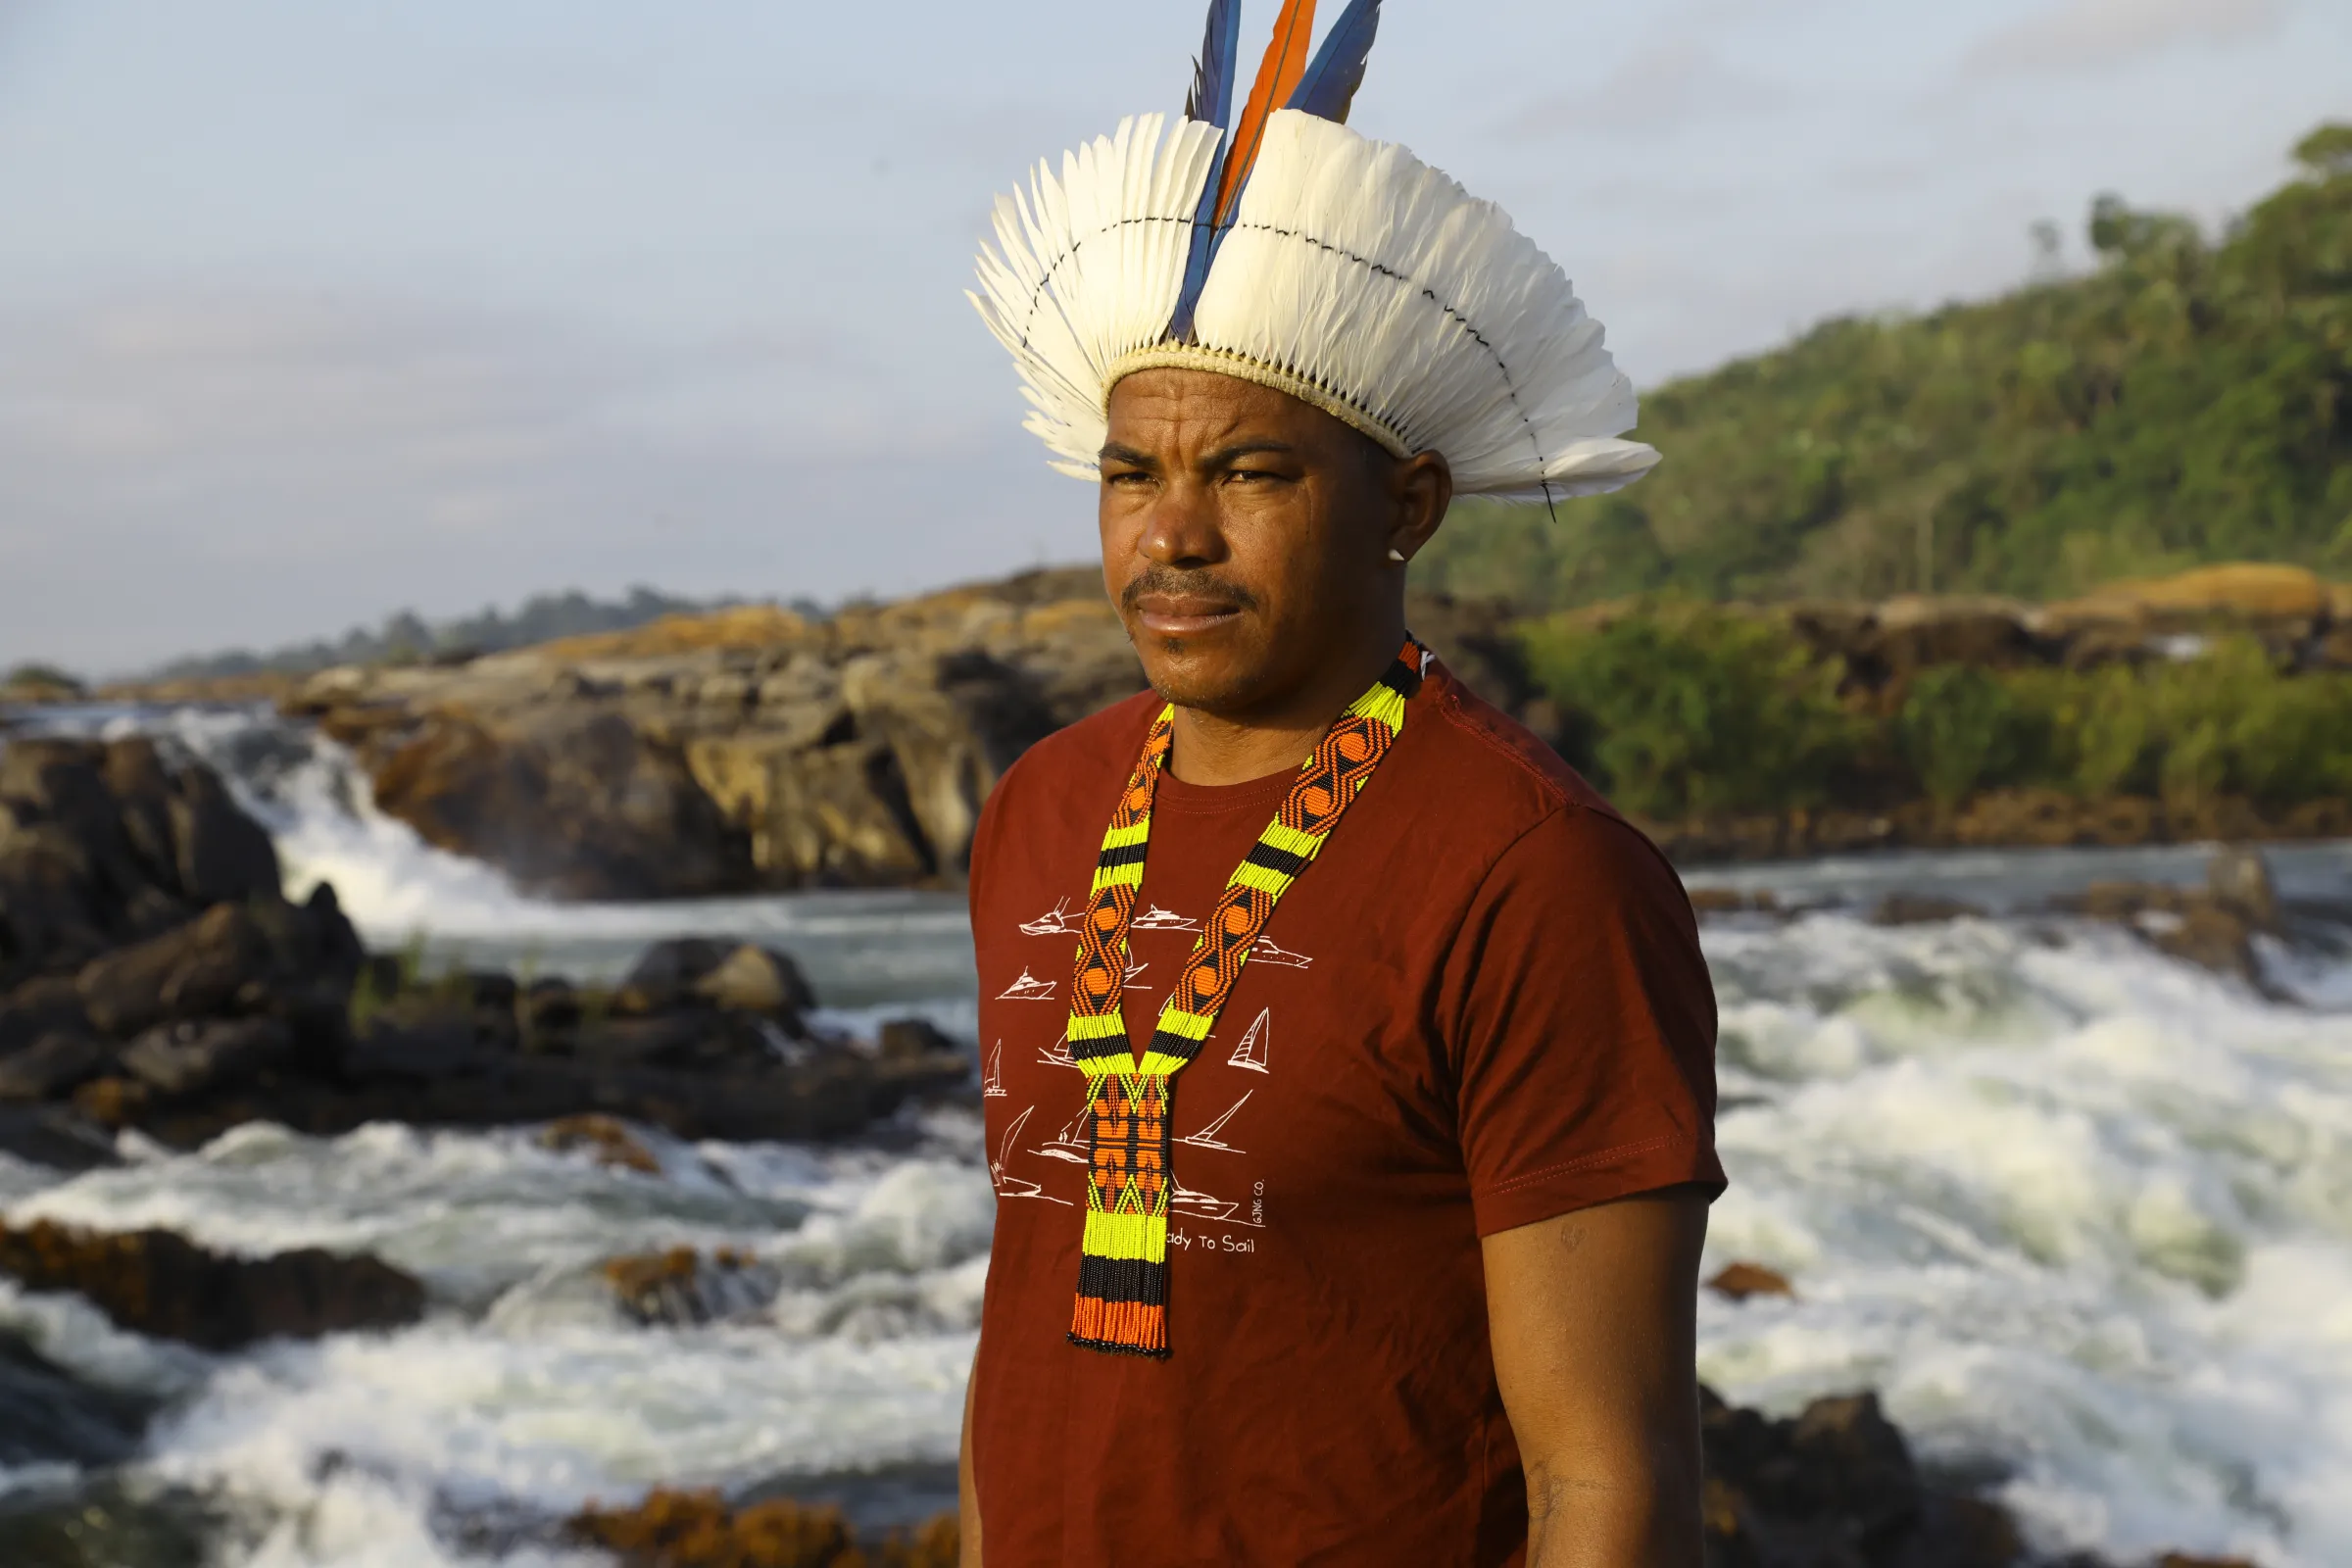 Giliarde Juruna, chief of the indigenous Juruna village of Mîratu, poses for a photograph at Jericoa, a sacred site with a confluence of waterfalls and rapids, on the Volta Grande in the River Xingu, Pará, Brazil, September 16, 2022. Thomson Reuters Foundation/Dan Collyns